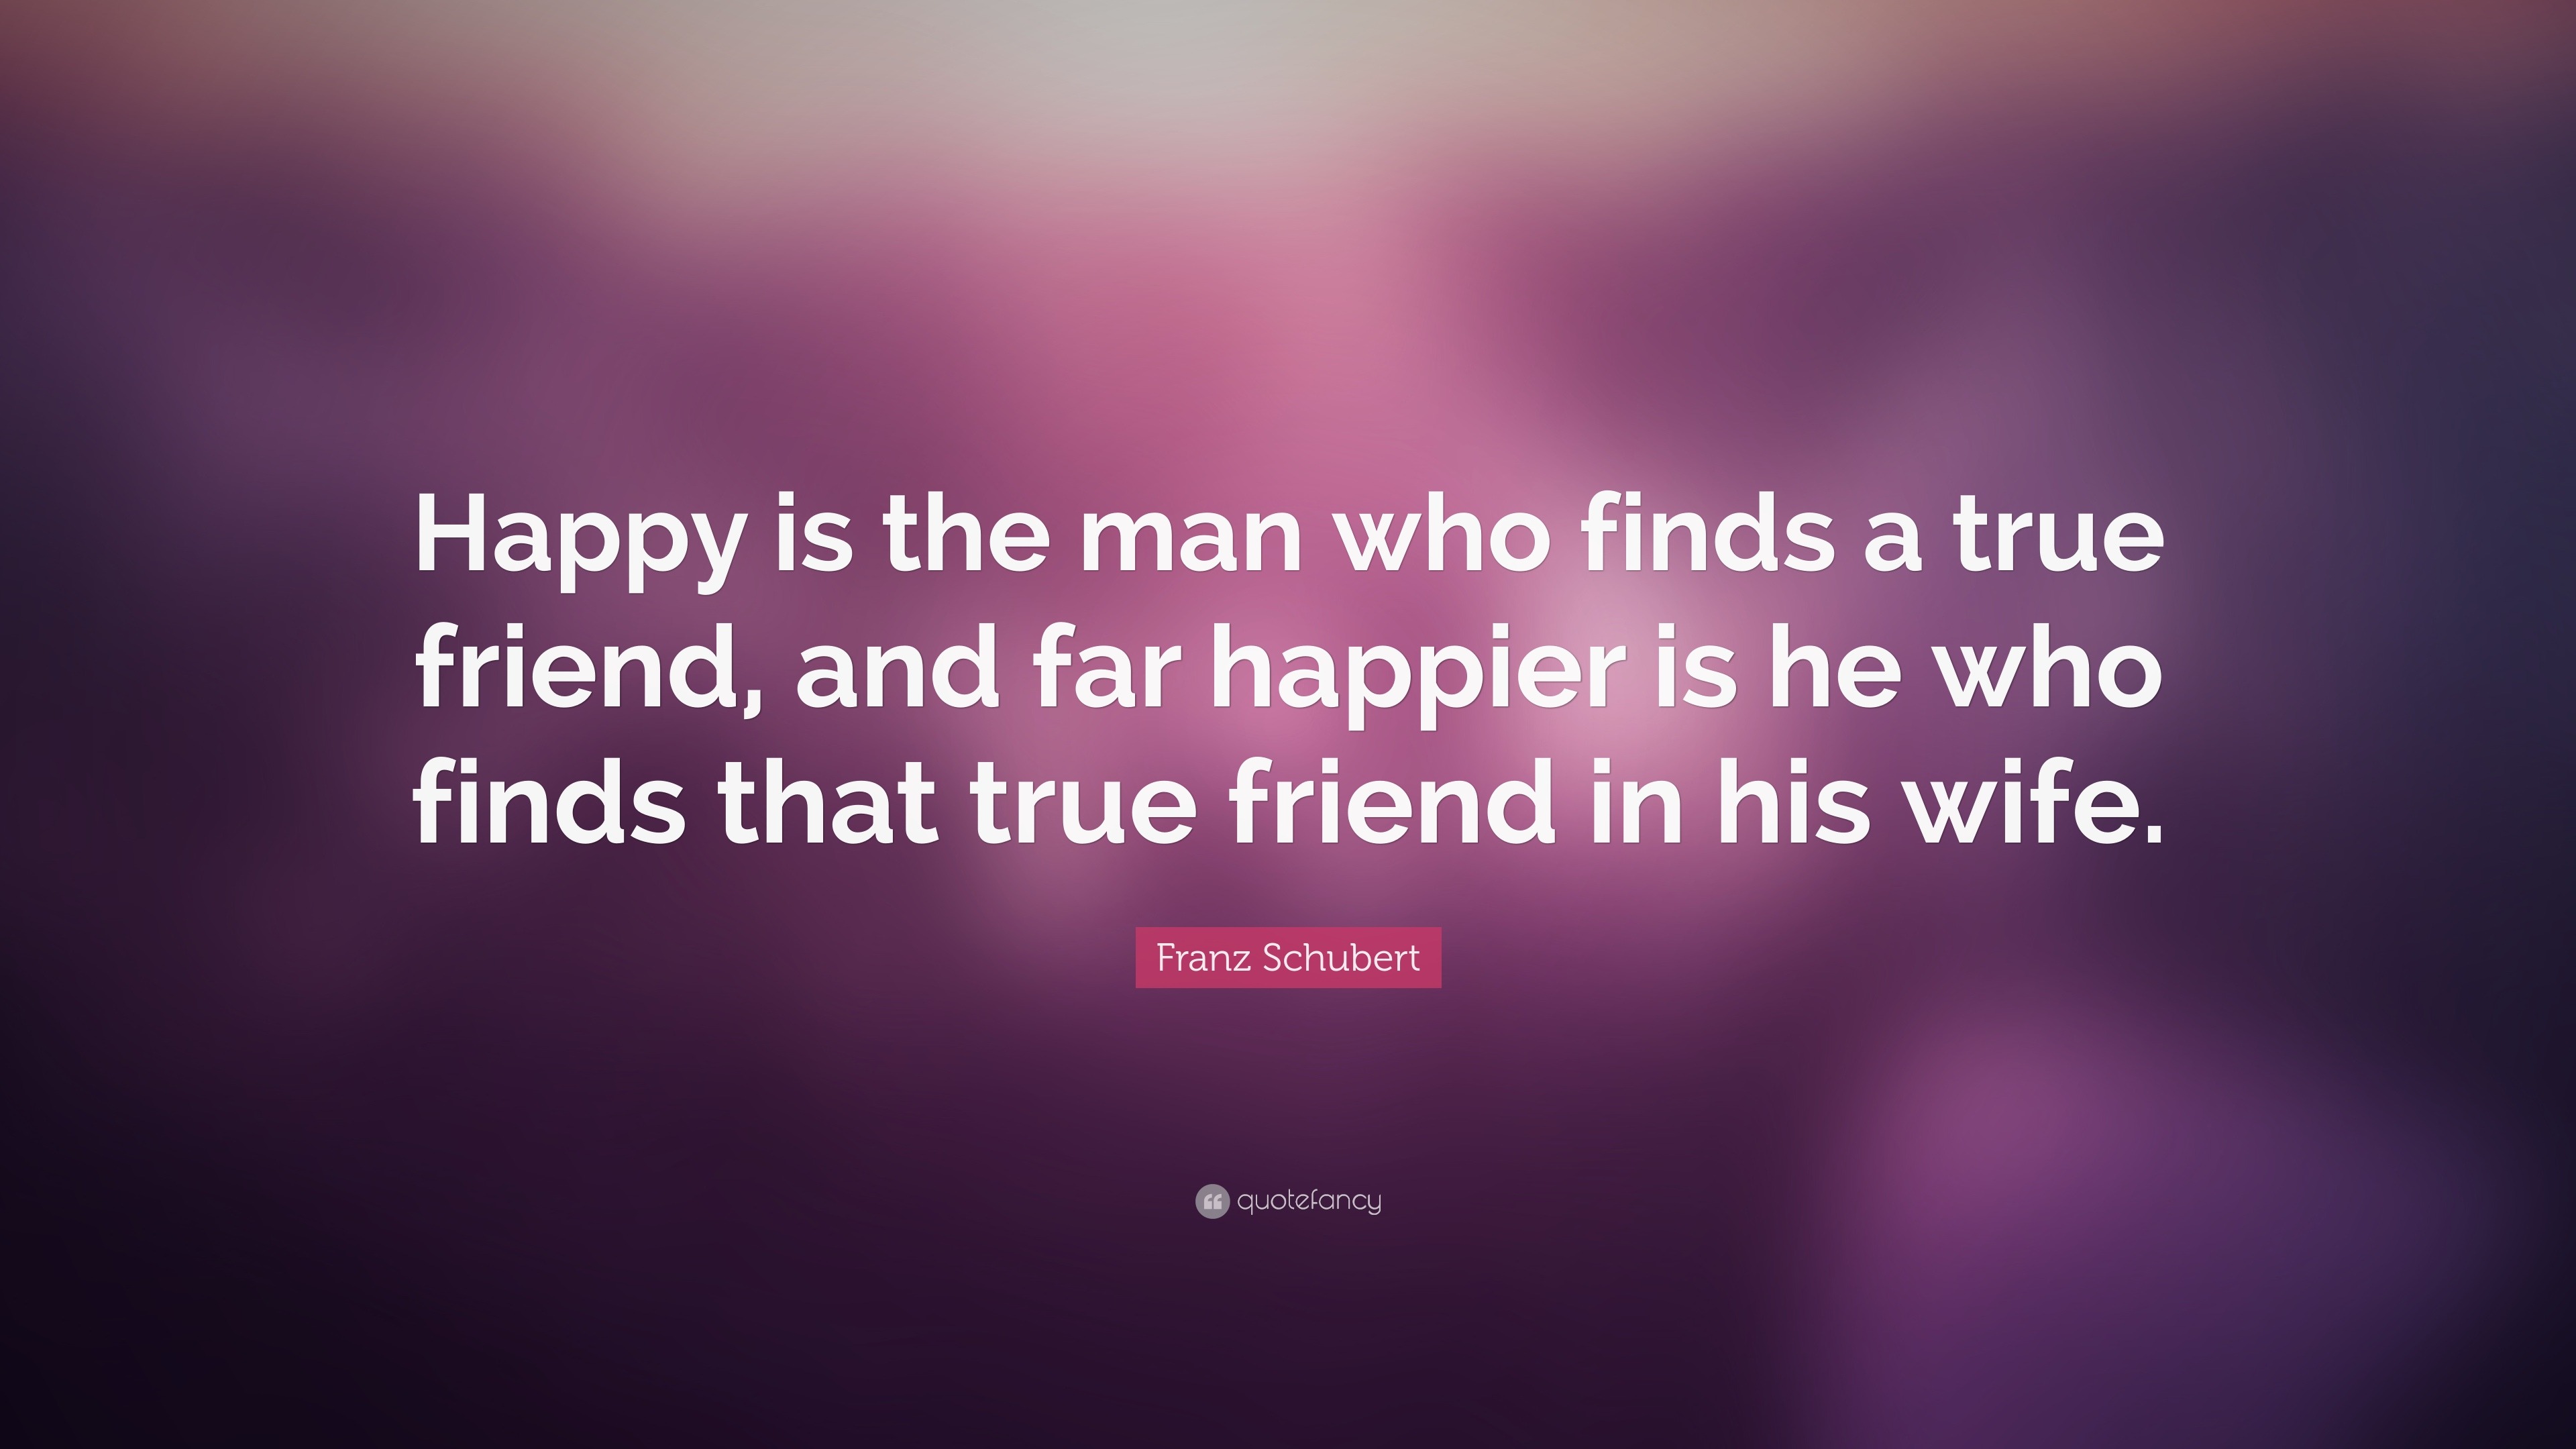 Blessed is the man who finds a true and enduring friend in his wife.”